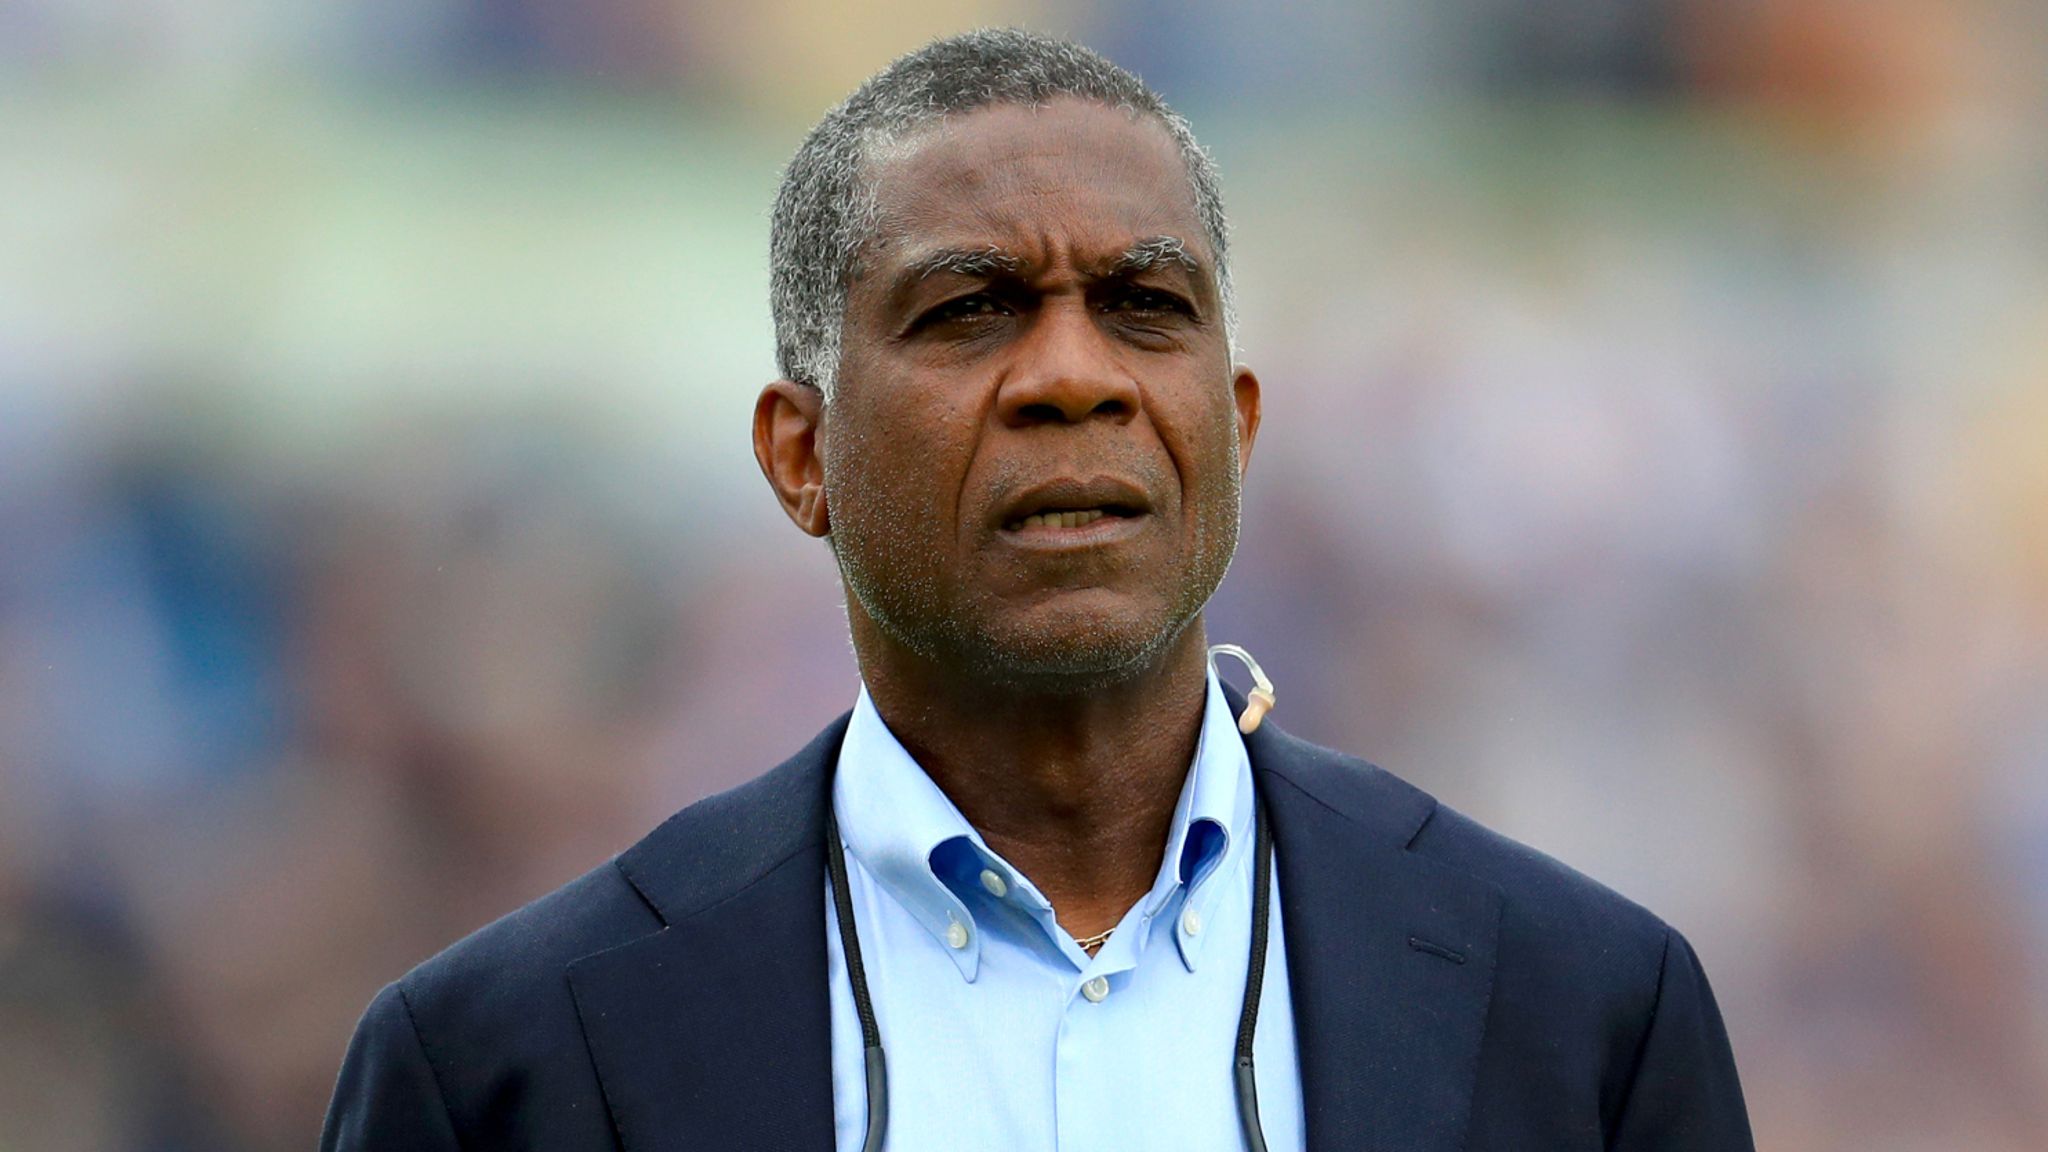 “They Show Their Hypocrisy, Lack Of Moral Standing” – Michael Holding Slams ICC Over Usman Khawaja Saga